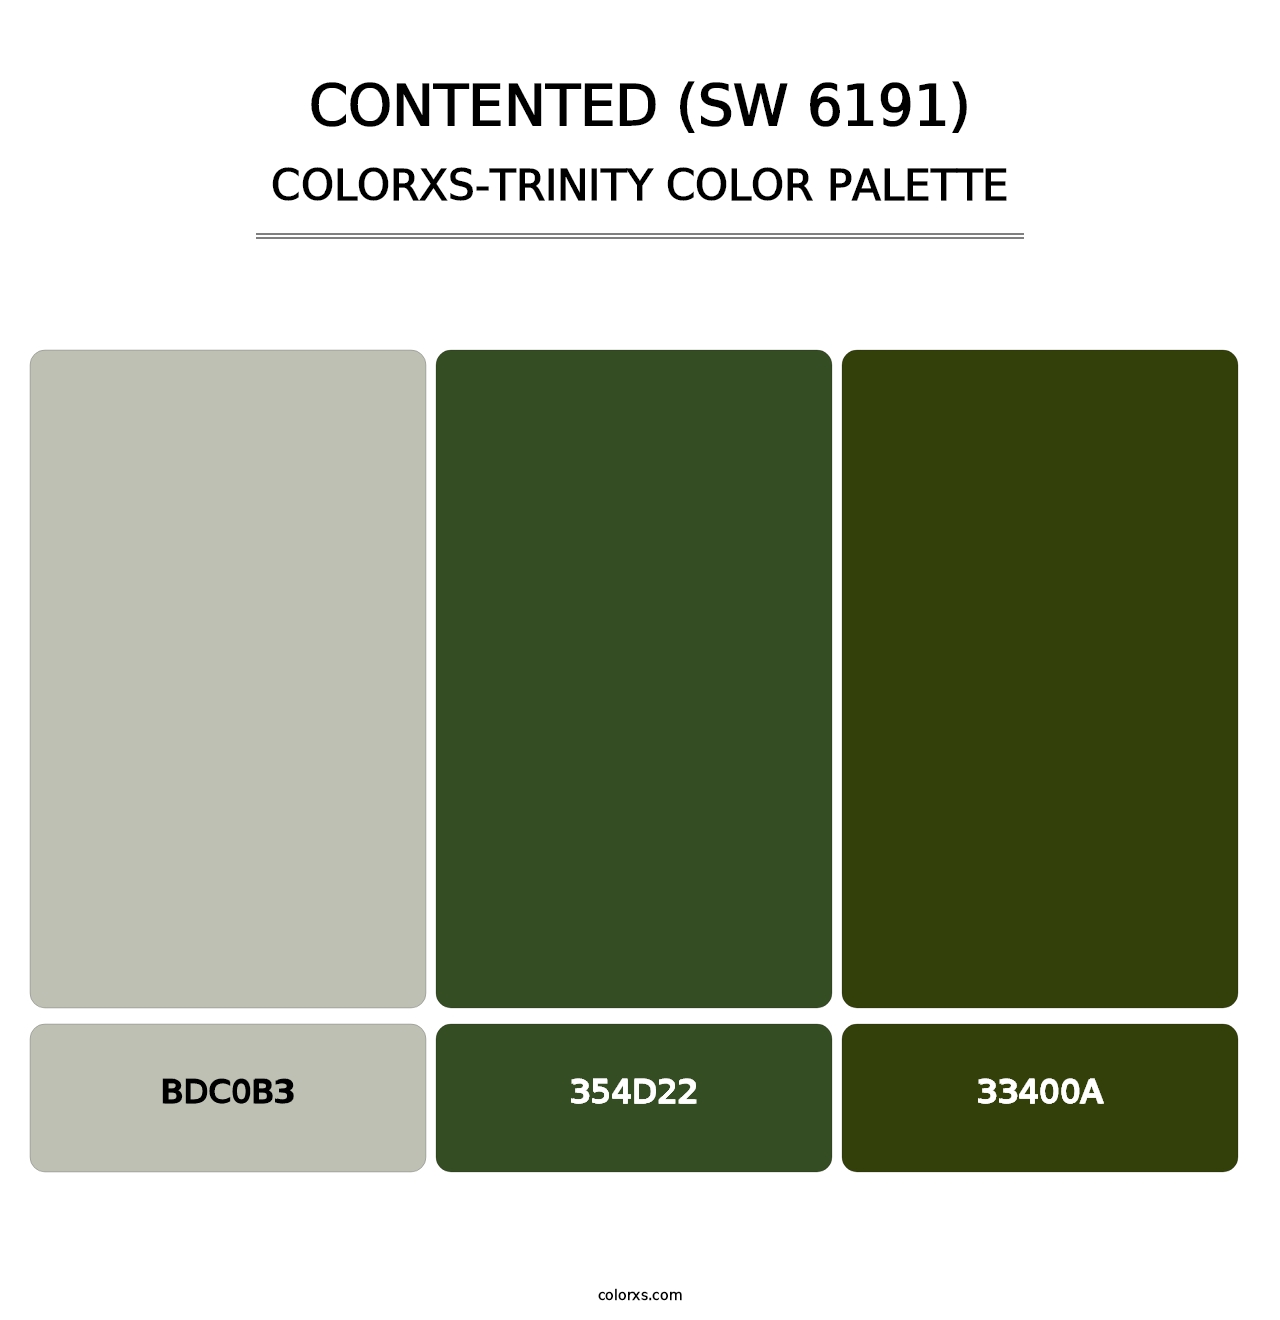 Contented (SW 6191) - Colorxs Trinity Palette